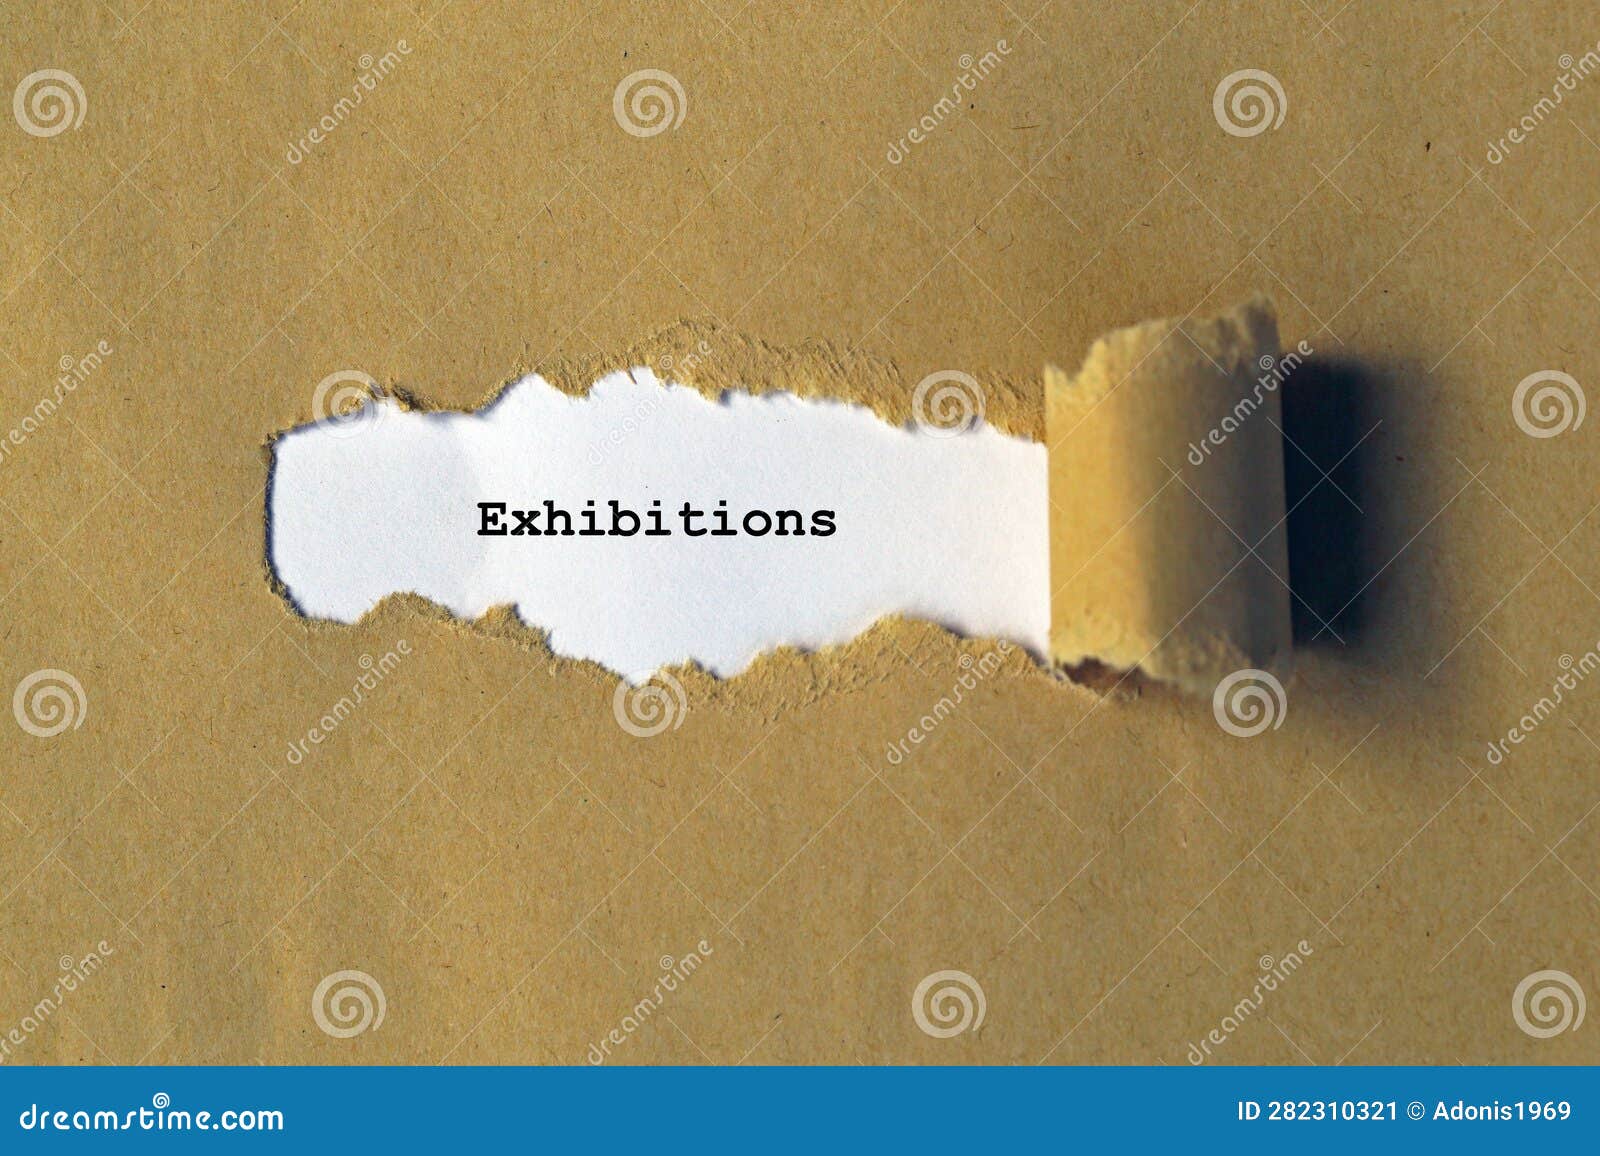 exhibitions on white paper